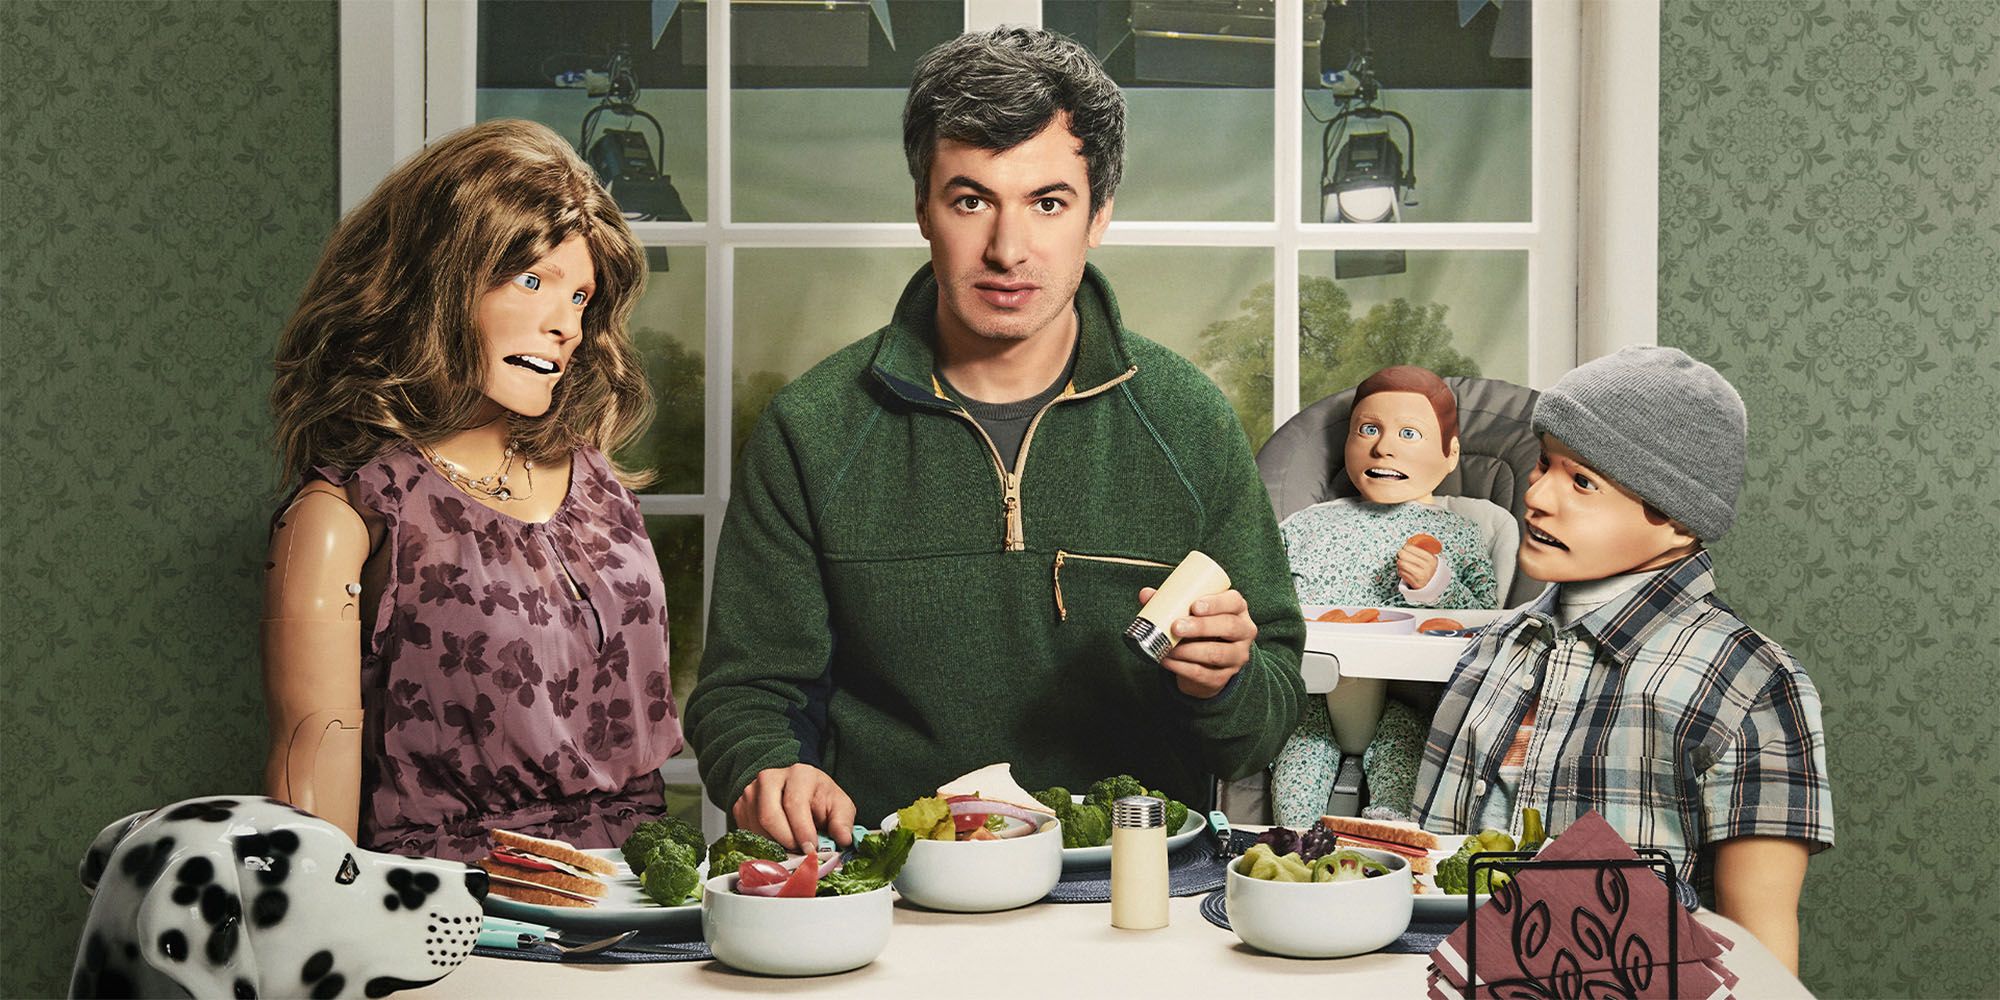 Nathan Fielder in The Rehearsal with bizarre dolls around a table